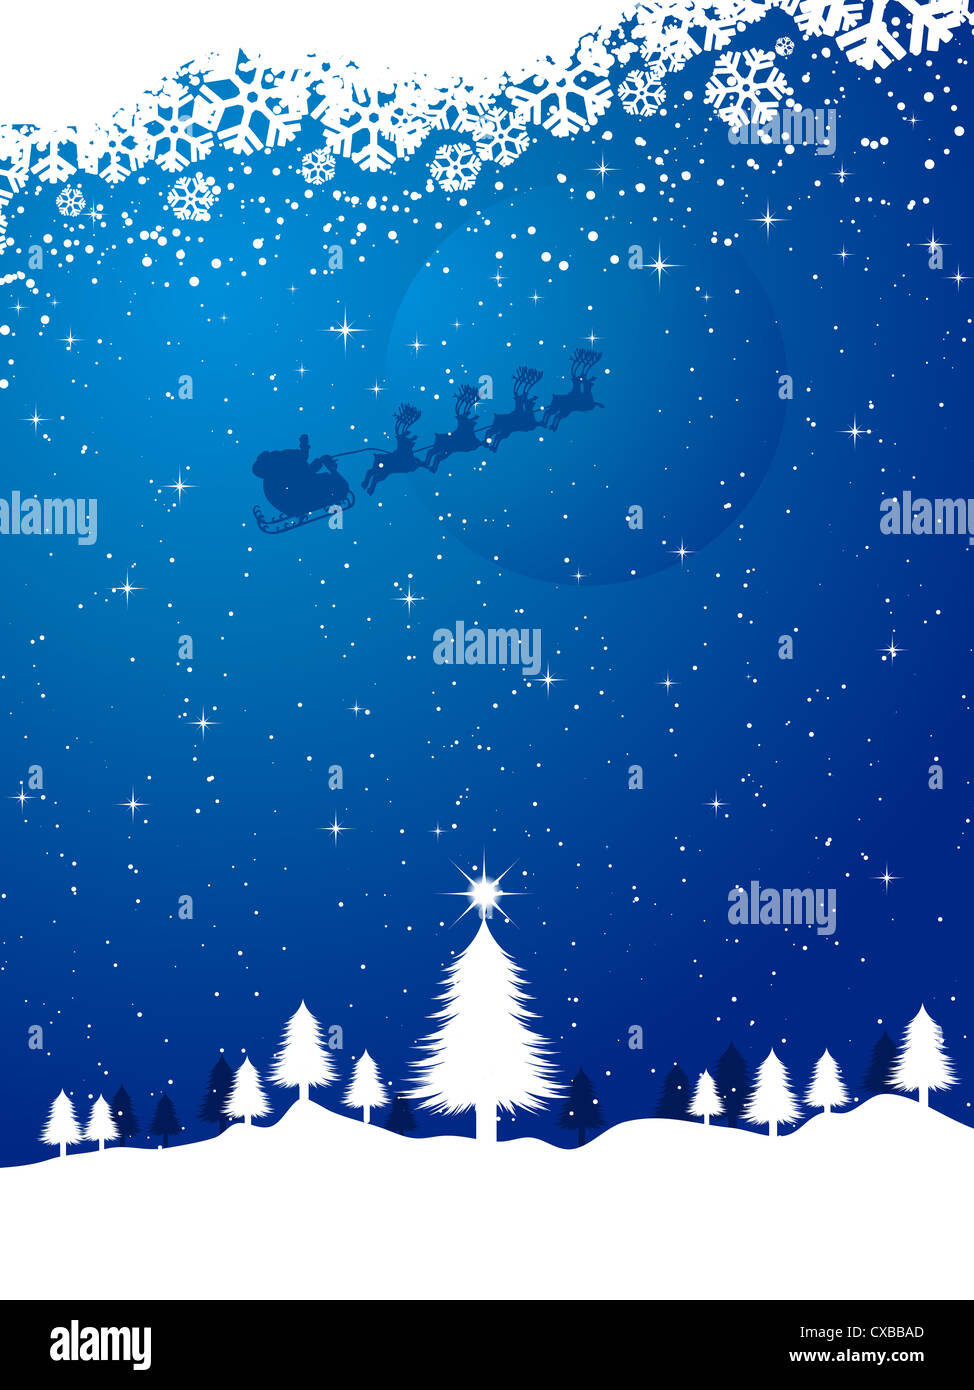 Winter landscape with santa flying in the sky Stock Photo